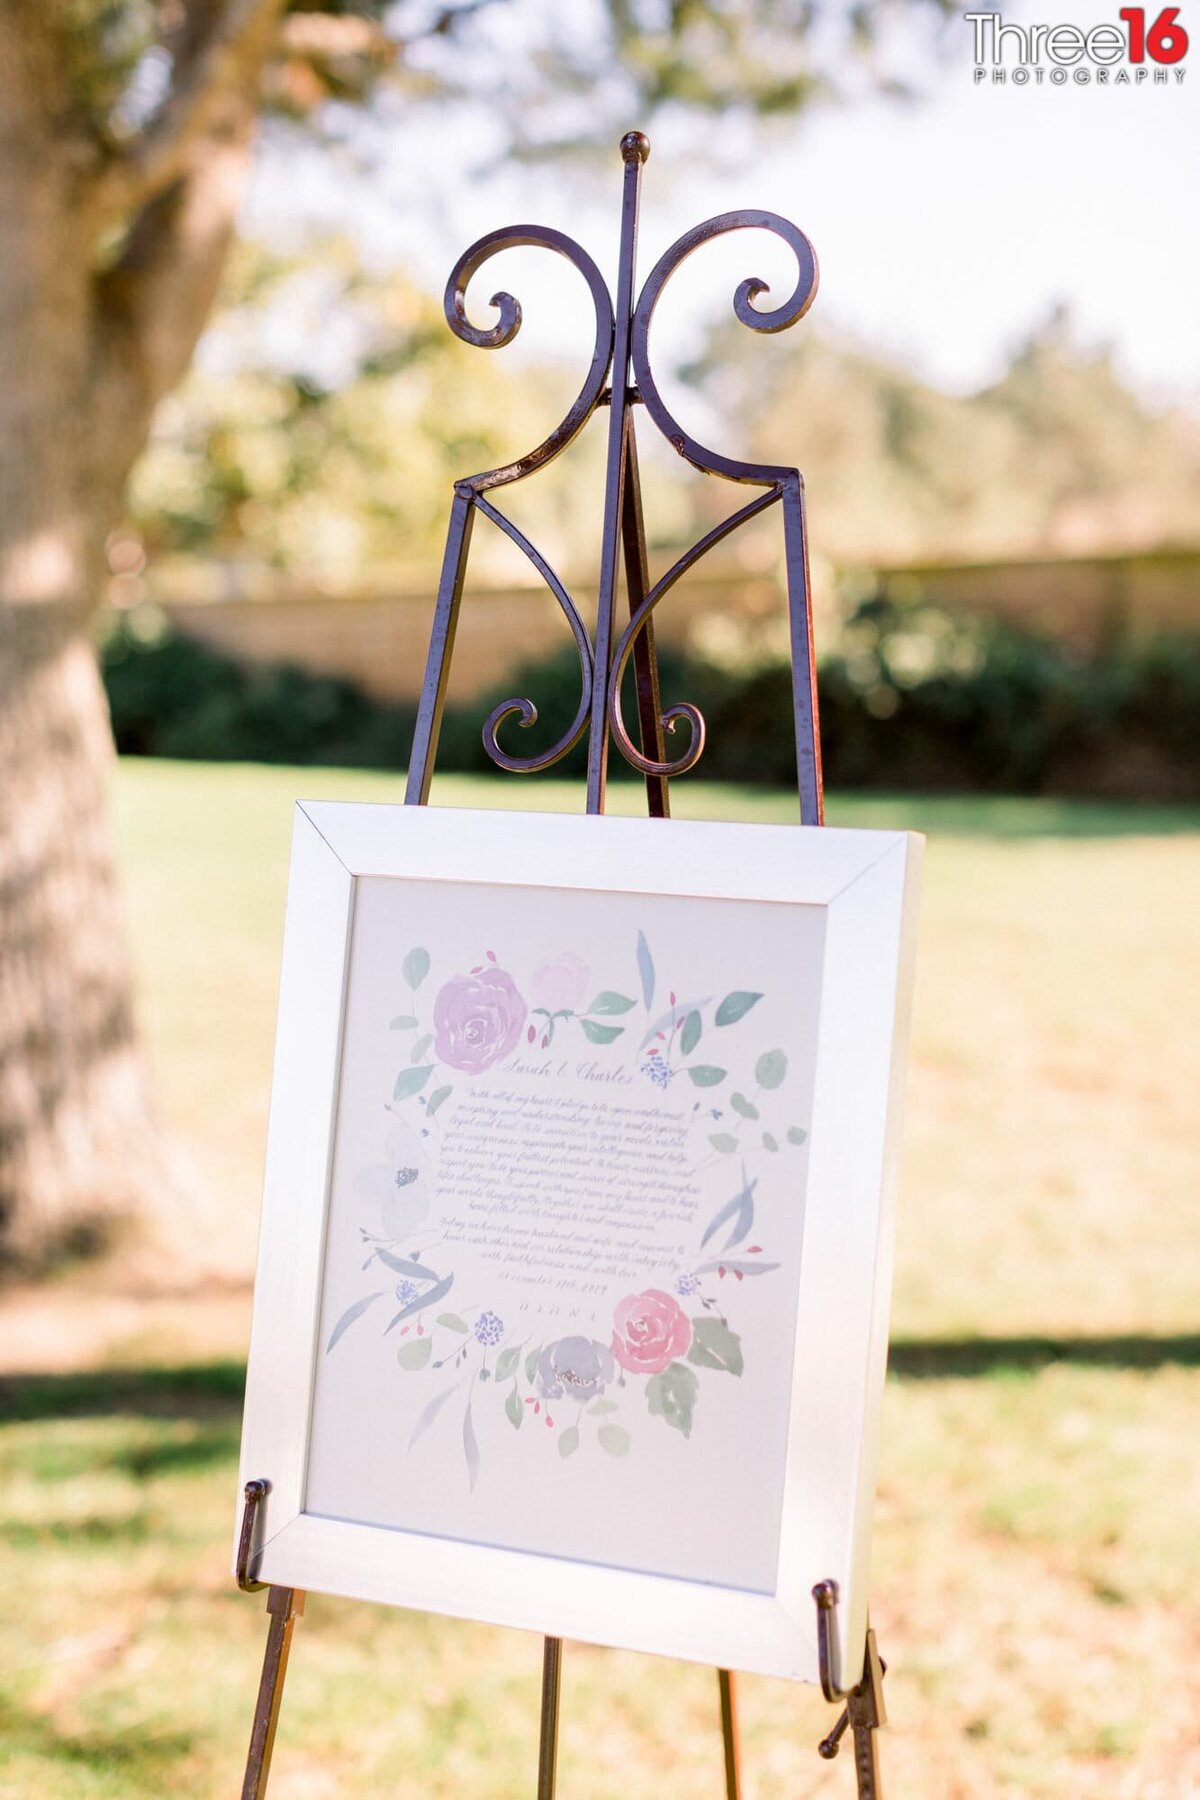 The Bride and Groom's story is on display at the wedding ceremony